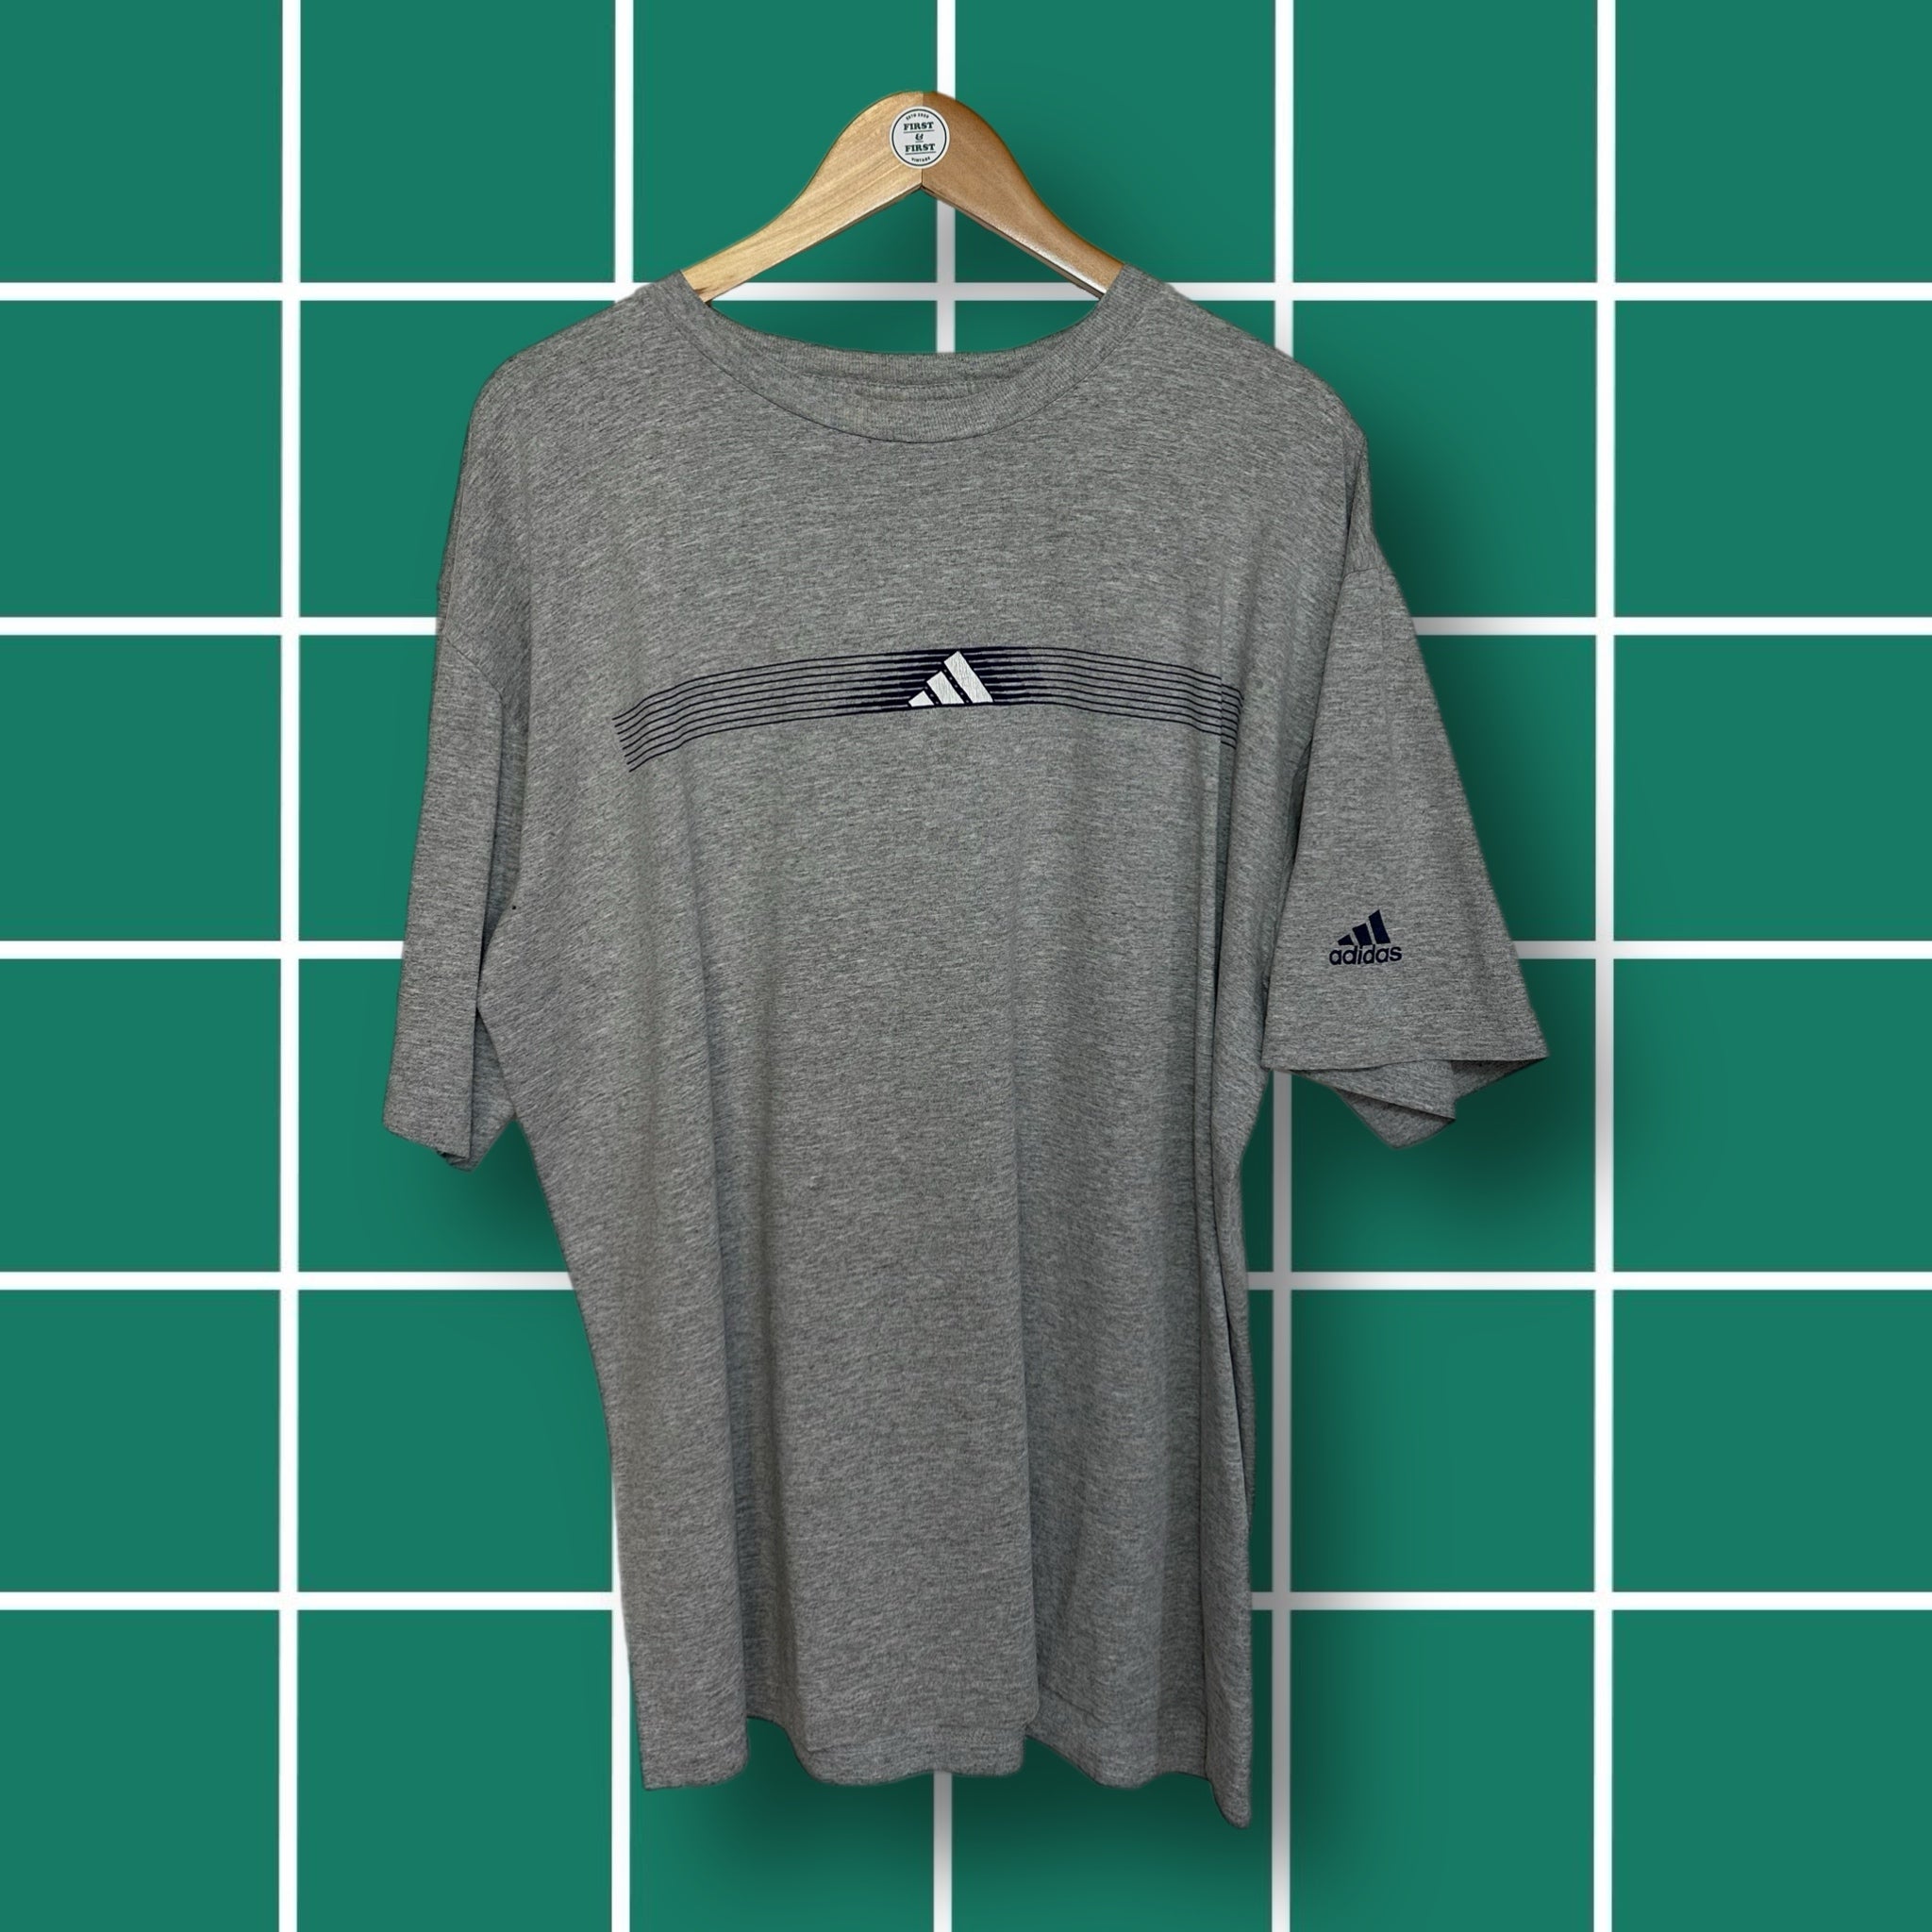 Vintage Adidas Centre Logo Tee – First and First Vintage